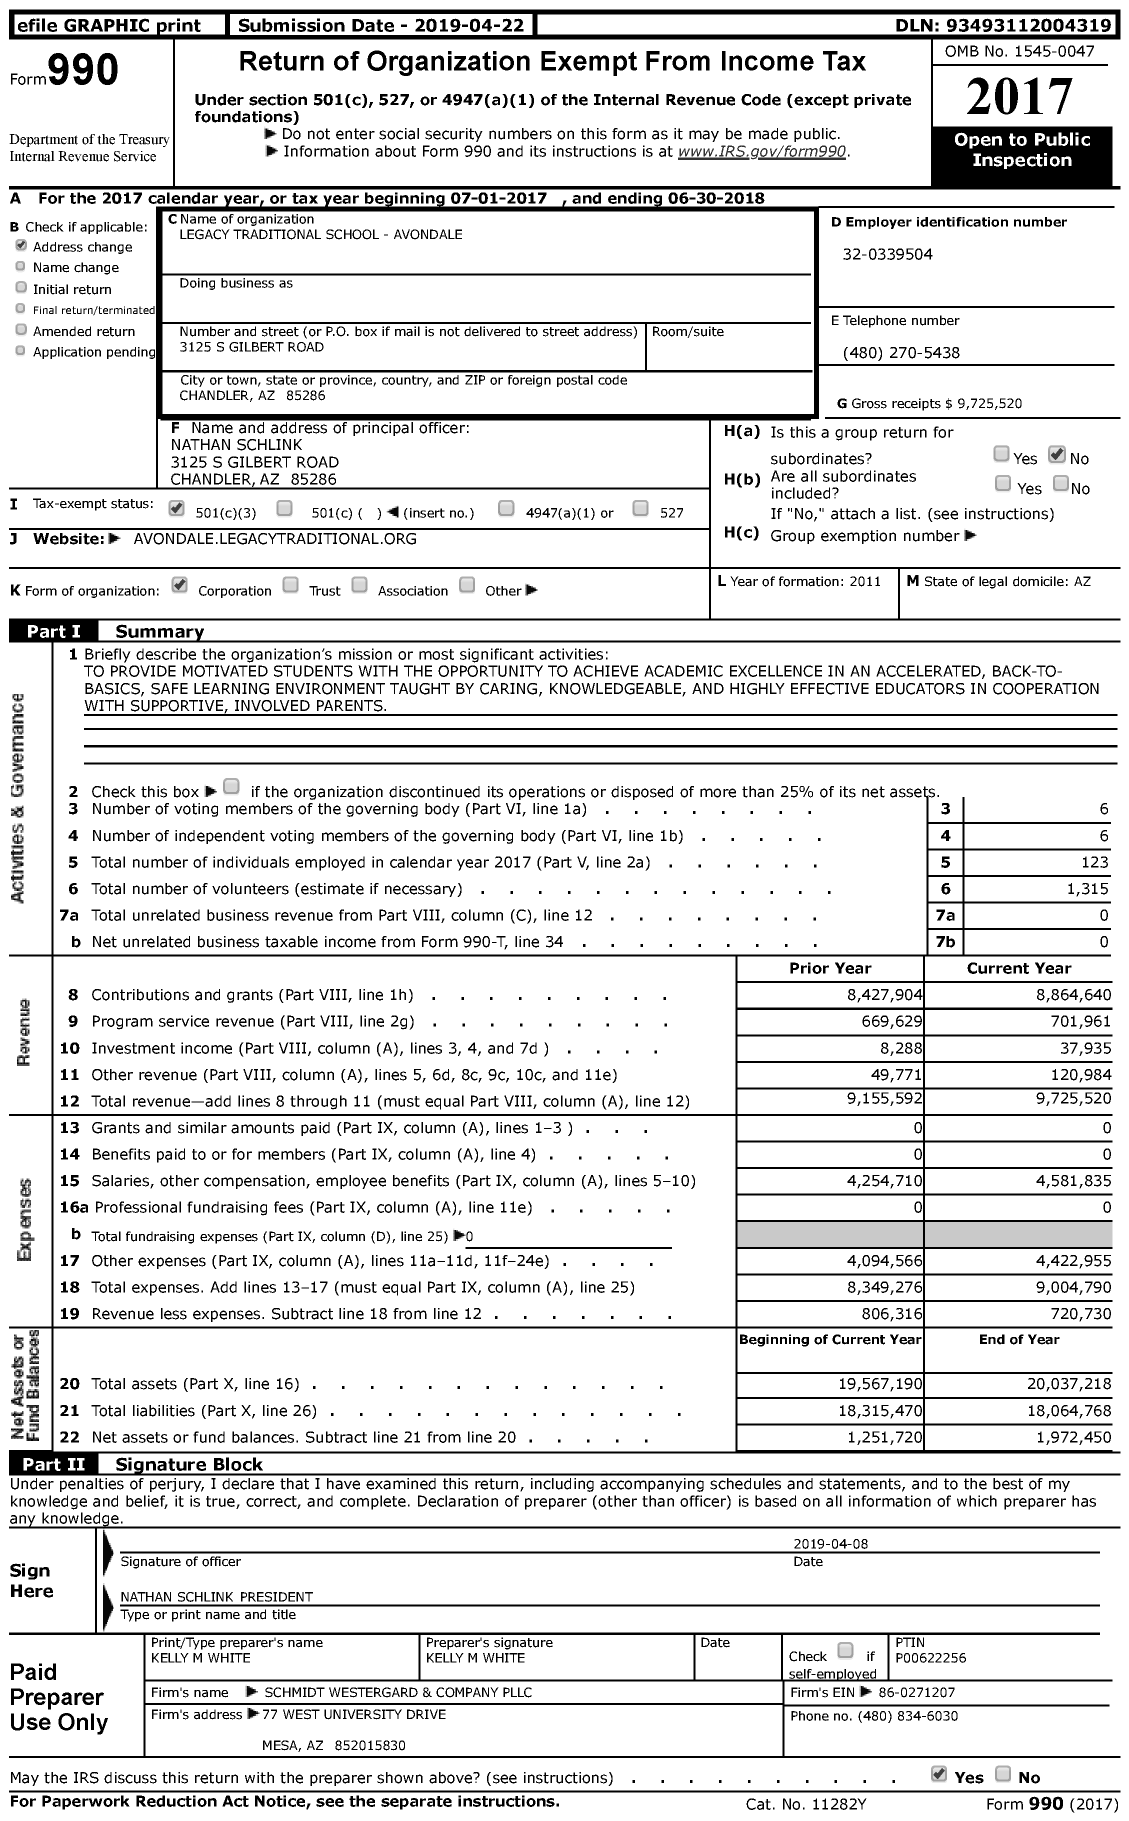 Image of first page of 2017 Form 990 for Legacy Traditional School-Avondale Incorporated (LTS)